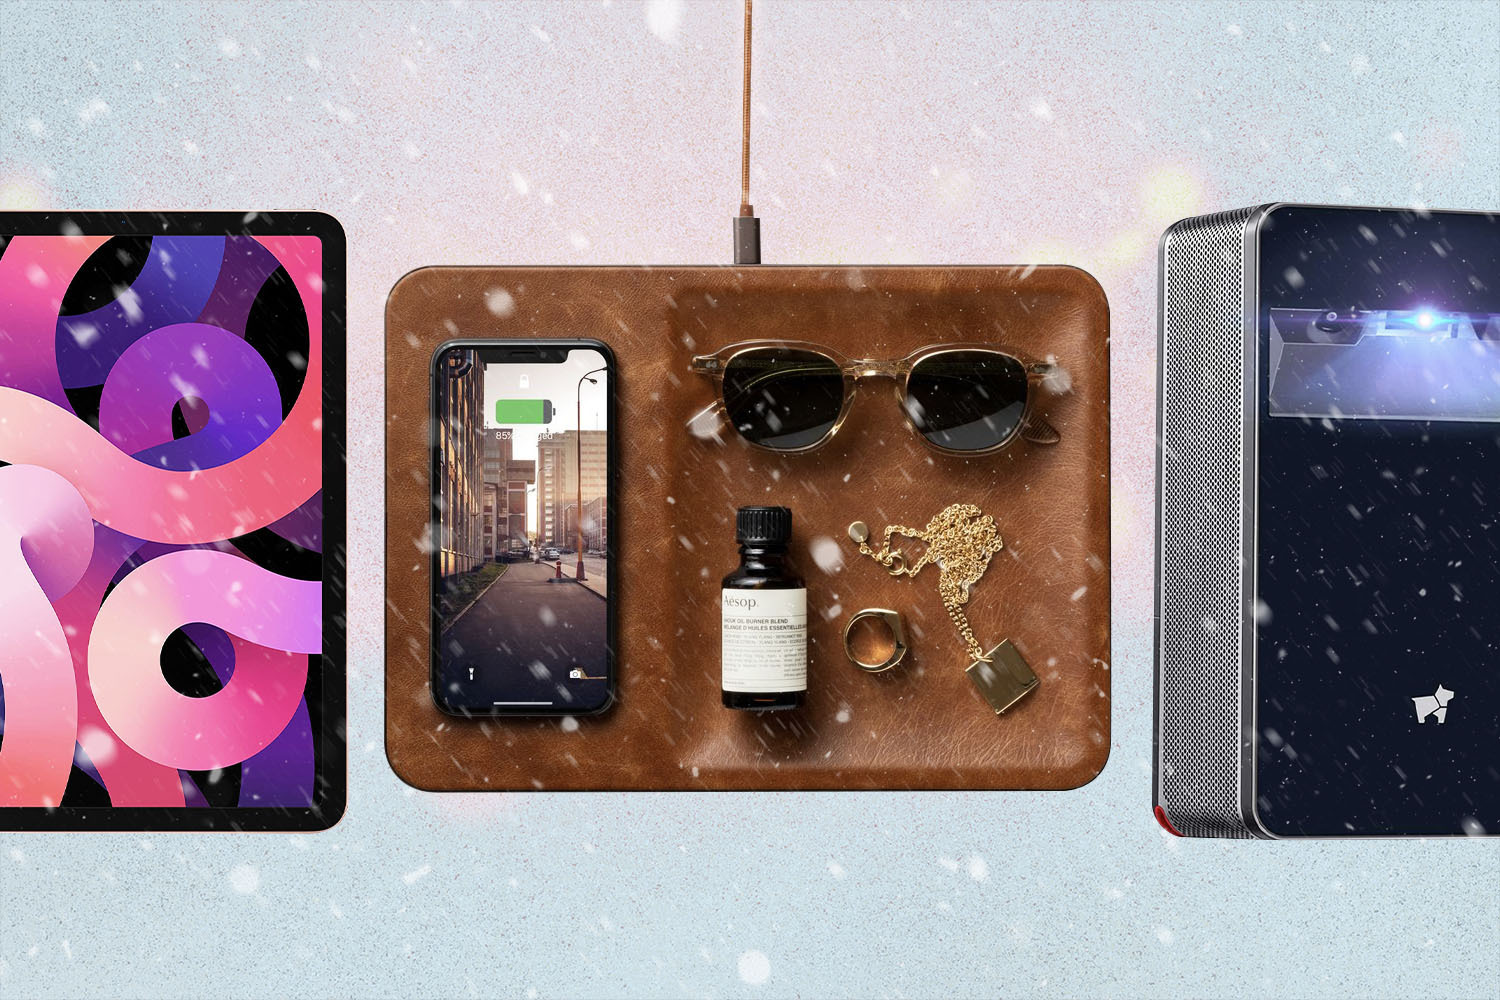 50 Best tech gifts under $150 to buy this holiday season